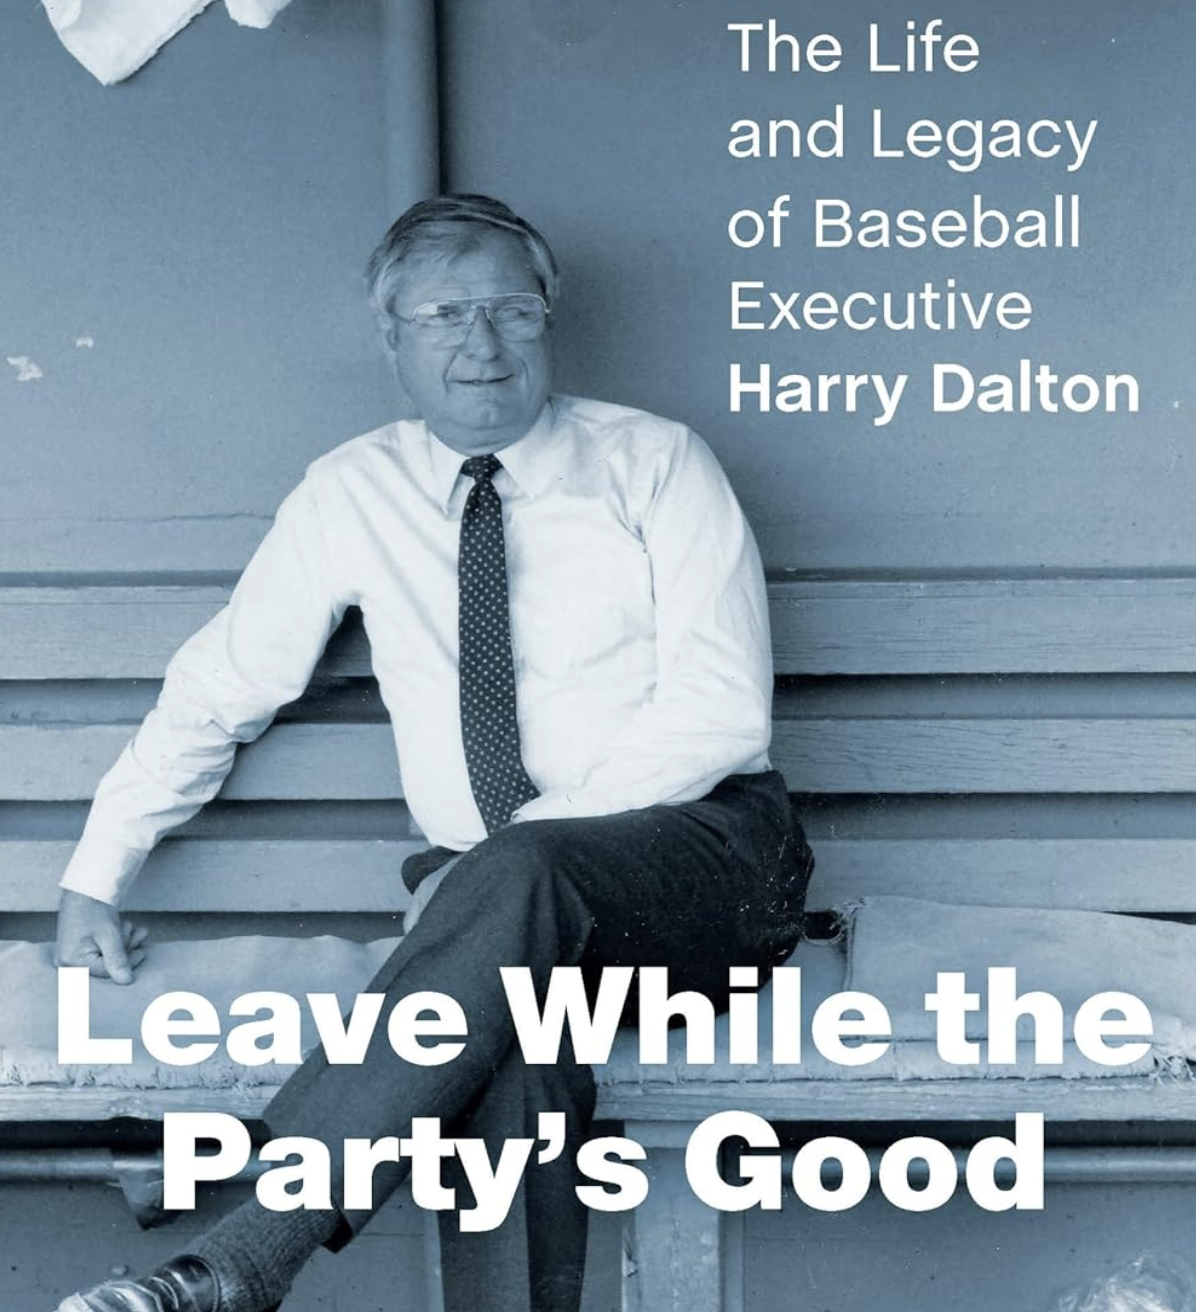 Understanding the legacy and role of Harry Dalton in Baltimore